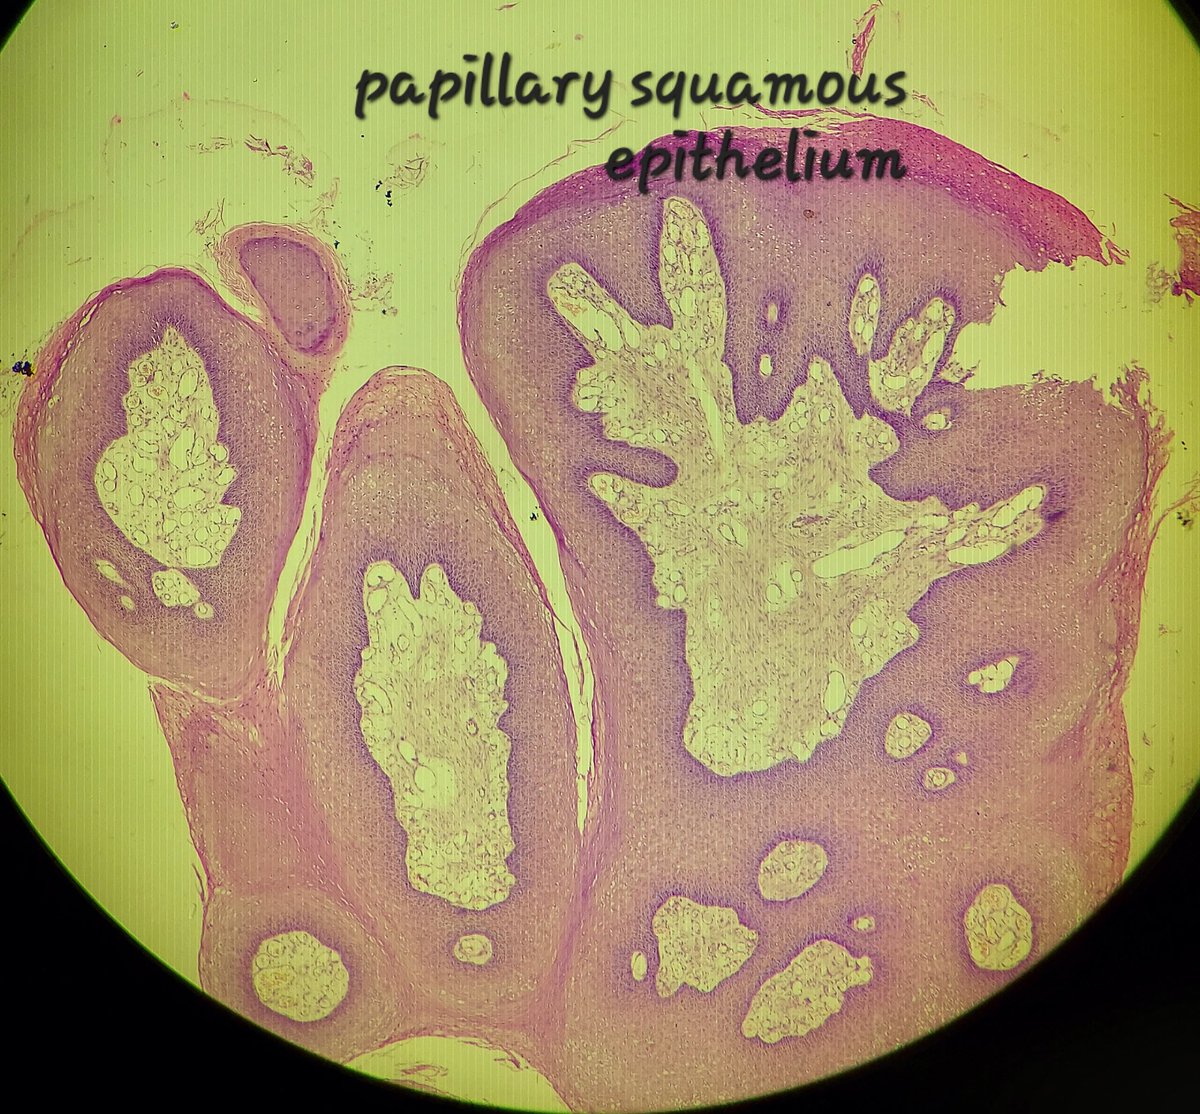 Thank you all for your response. This was Condyloma acuminata.
🔬1️⃣Hyperplastic papillary exophytic squamous epithelium
2️⃣Marked acanthosis
3️⃣Parakeratosis
4️⃣Fibrovascular core
5️⃣Koilocytosis (irregular nuclei, binucleate, perinuclear halo)
#gipath #IDpath